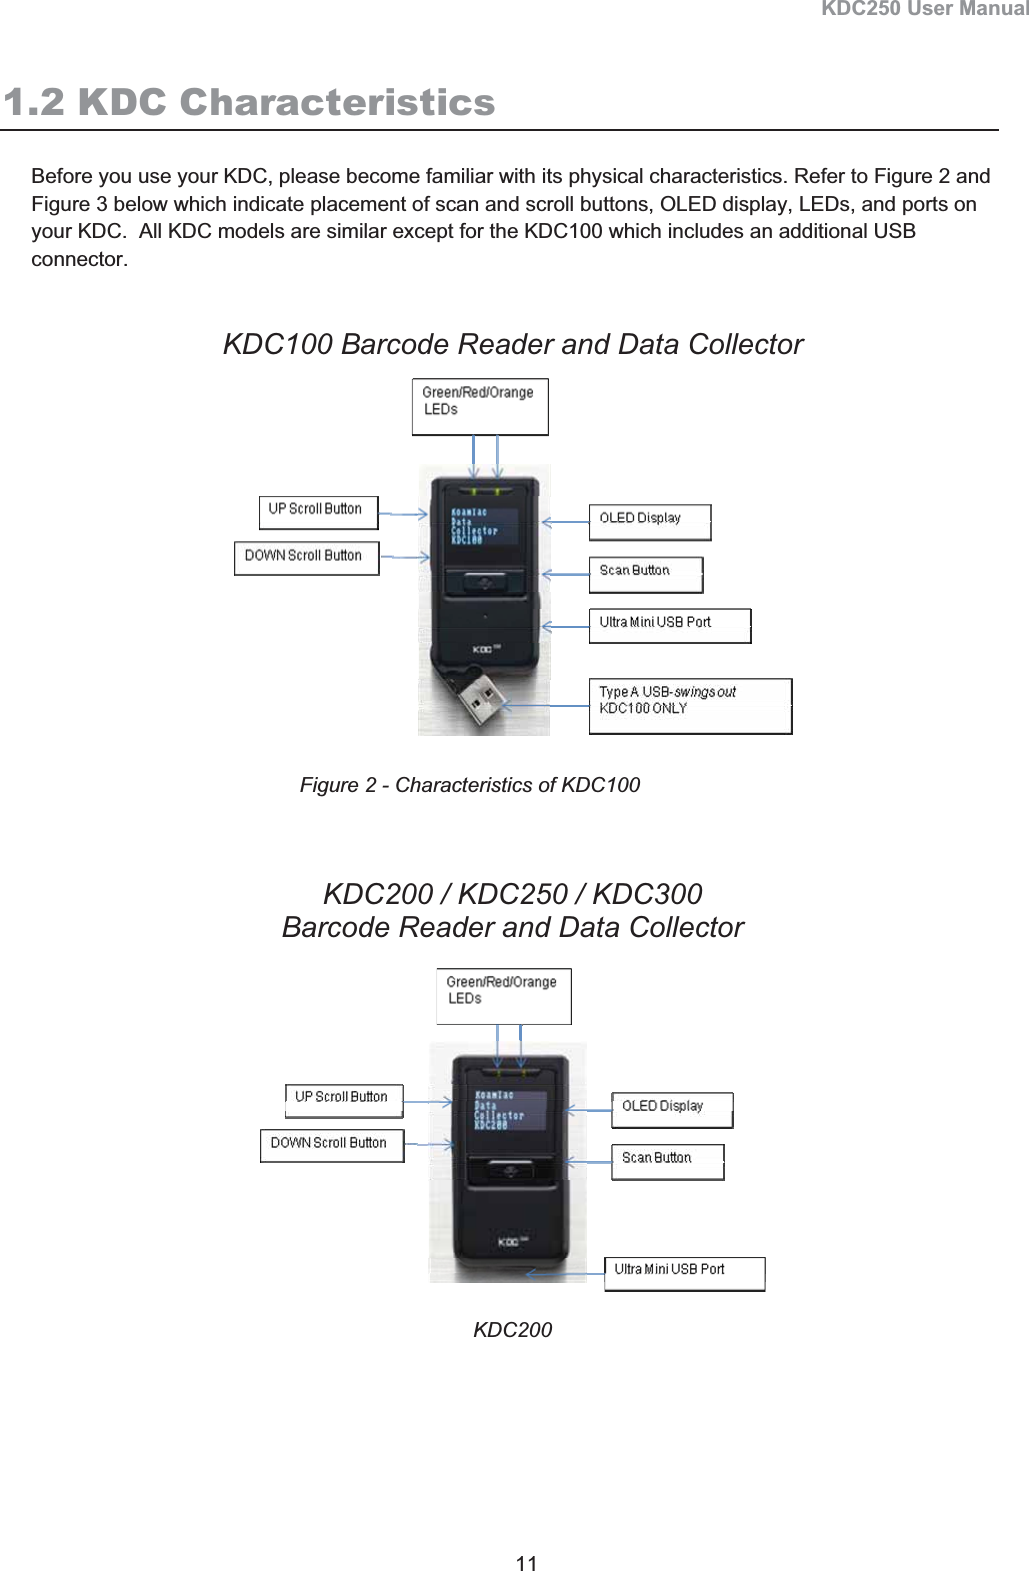 KDC250 User Manual 11 1.2 KDC Characteristics Before you use your KDC, please become familiar with its physical characteristics. Refer to Figure 2 and Figure 3 below which indicate placement of scan and scroll buttons, OLED display, LEDs, and ports on your KDC.  All KDC models are similar except for the KDC100 which includes an additional USB connector. KDC100 Barcode Reader and Data Collector KDC200 / KDC250 / KDC300 Barcode Reader and Data Collector       KDC200 Figure 2 - Characteristics of KDC100 